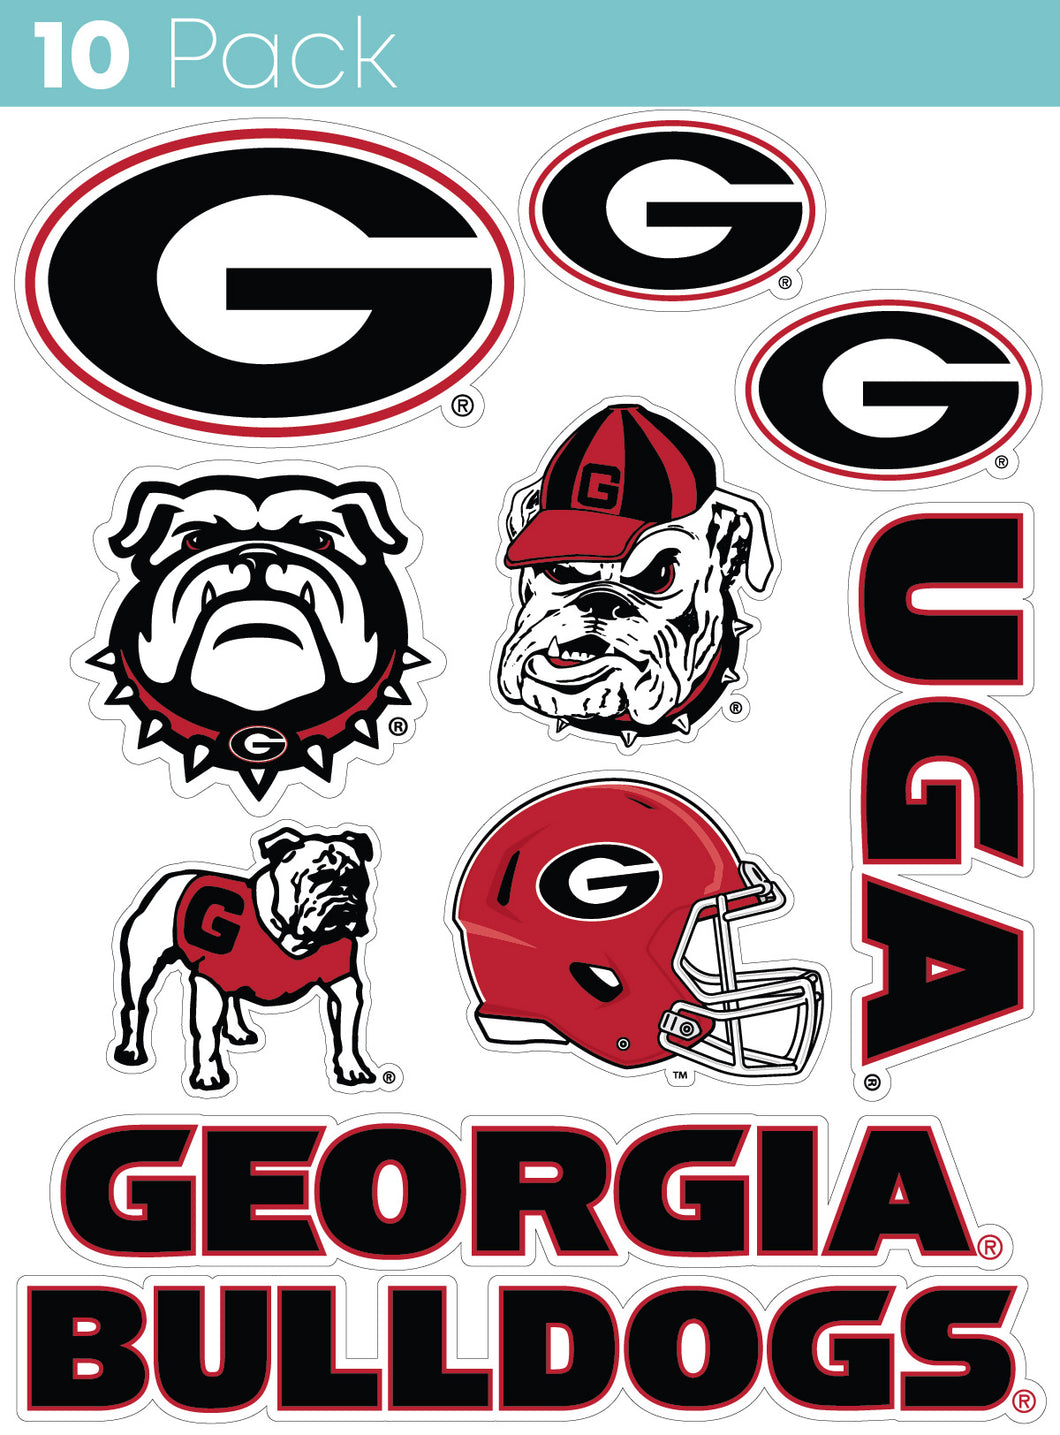 Georgia Bulldogs 10-Pack, 4 inches in size on one of its sides NCAA Durable School Spirit Vinyl Decal Sticker